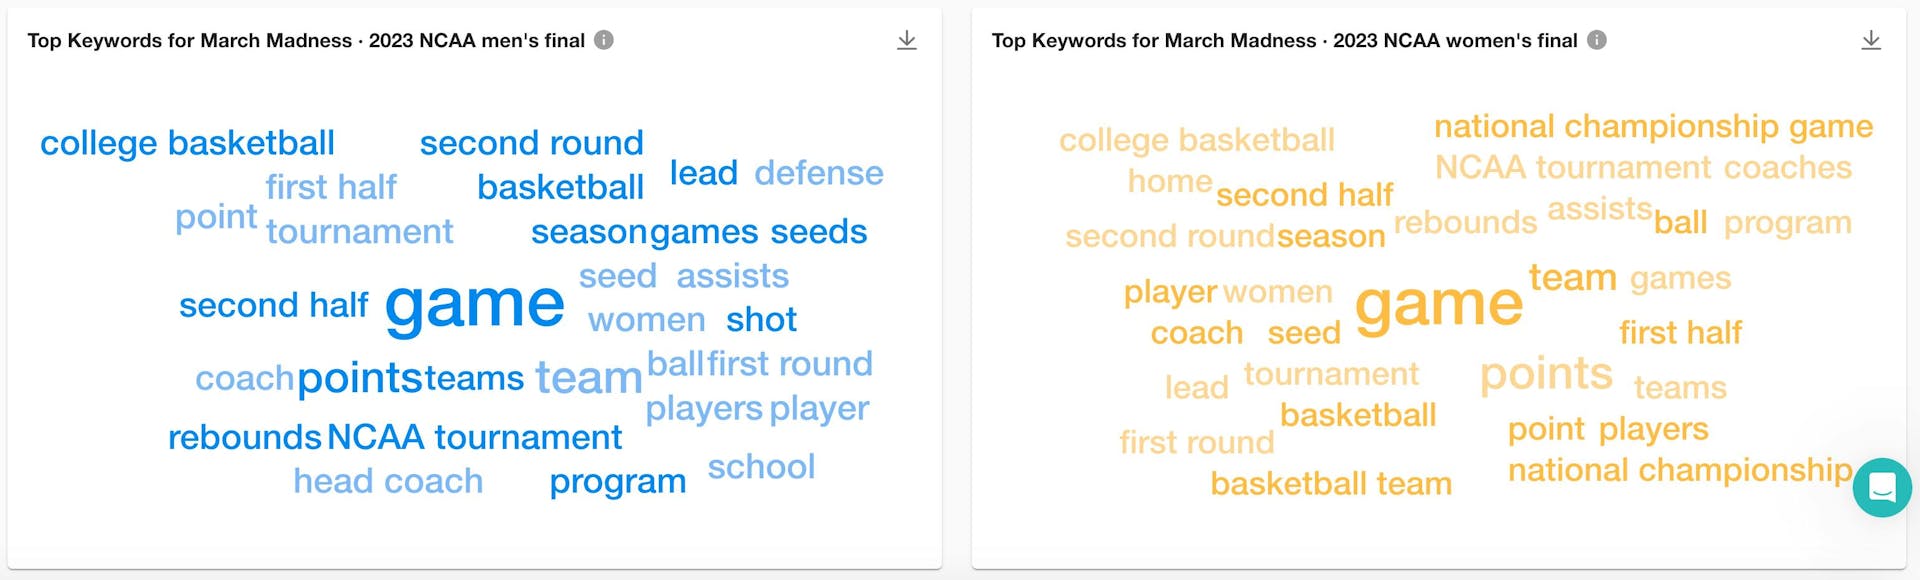 The top keywords for the men's tournament next to the top keywords for the women's tournament. In each, the word "game" is the largest, denoting that it was the most-mentioned keyword.